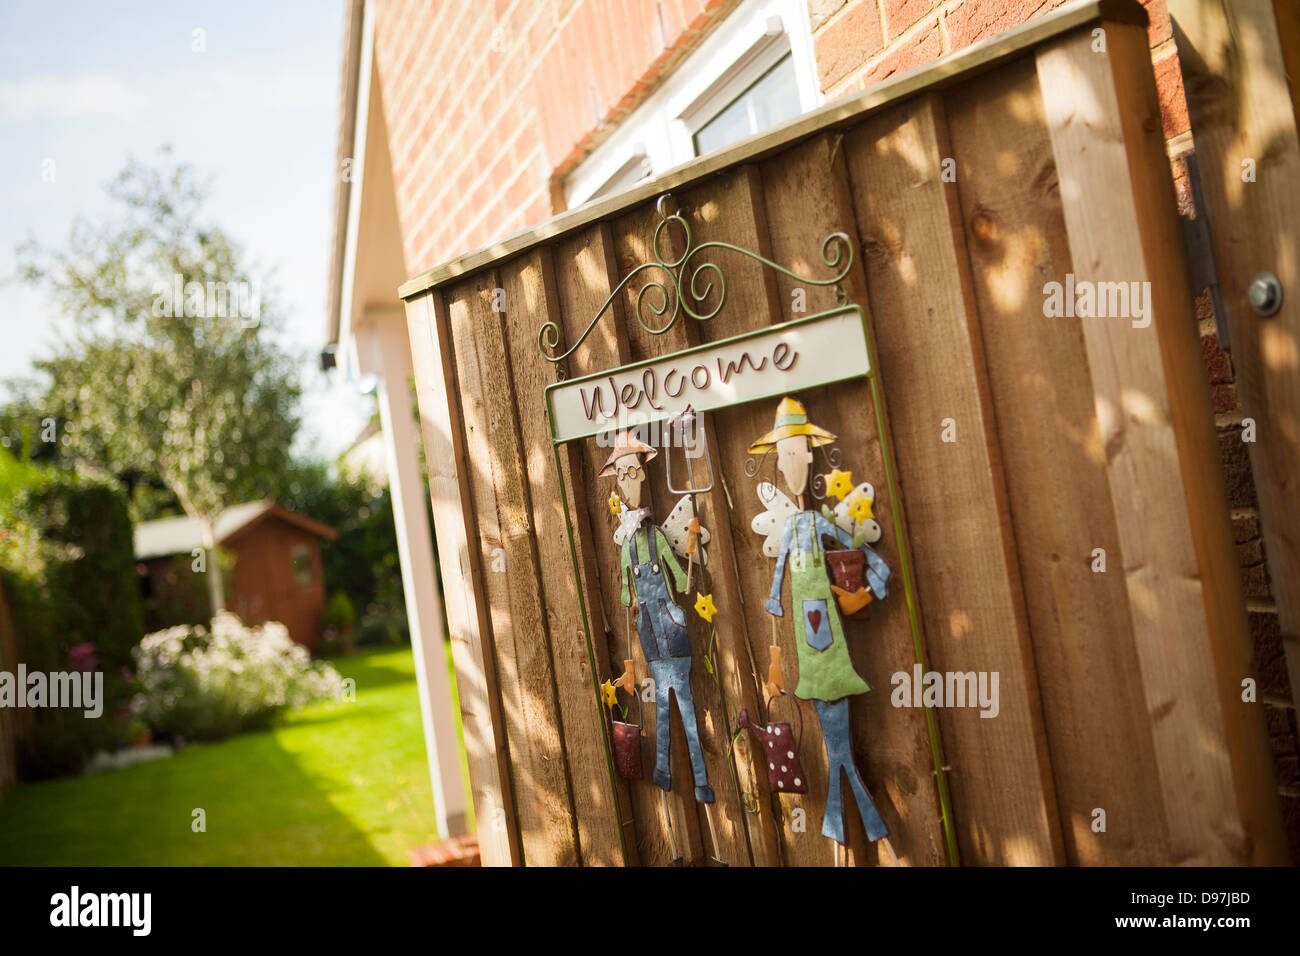 open garden side gate with welcome sign showing the garden with shed in background. Stock Photo